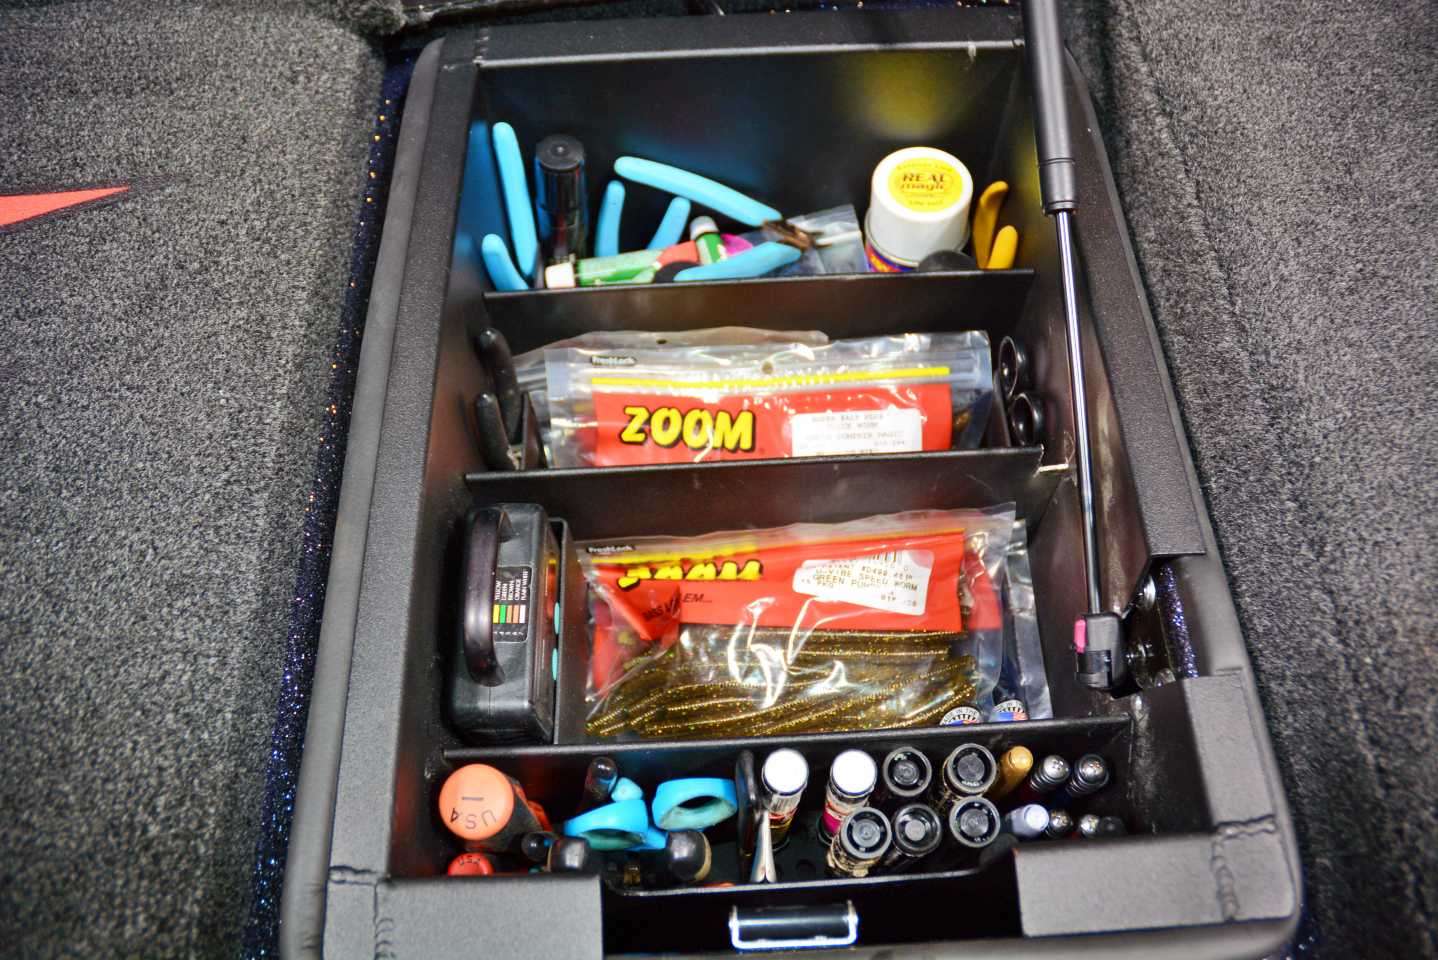 Gross calls this custom add-on his day box, where frequently used items are easily found and accessible. The box is on the starboard side, forward of the console.  